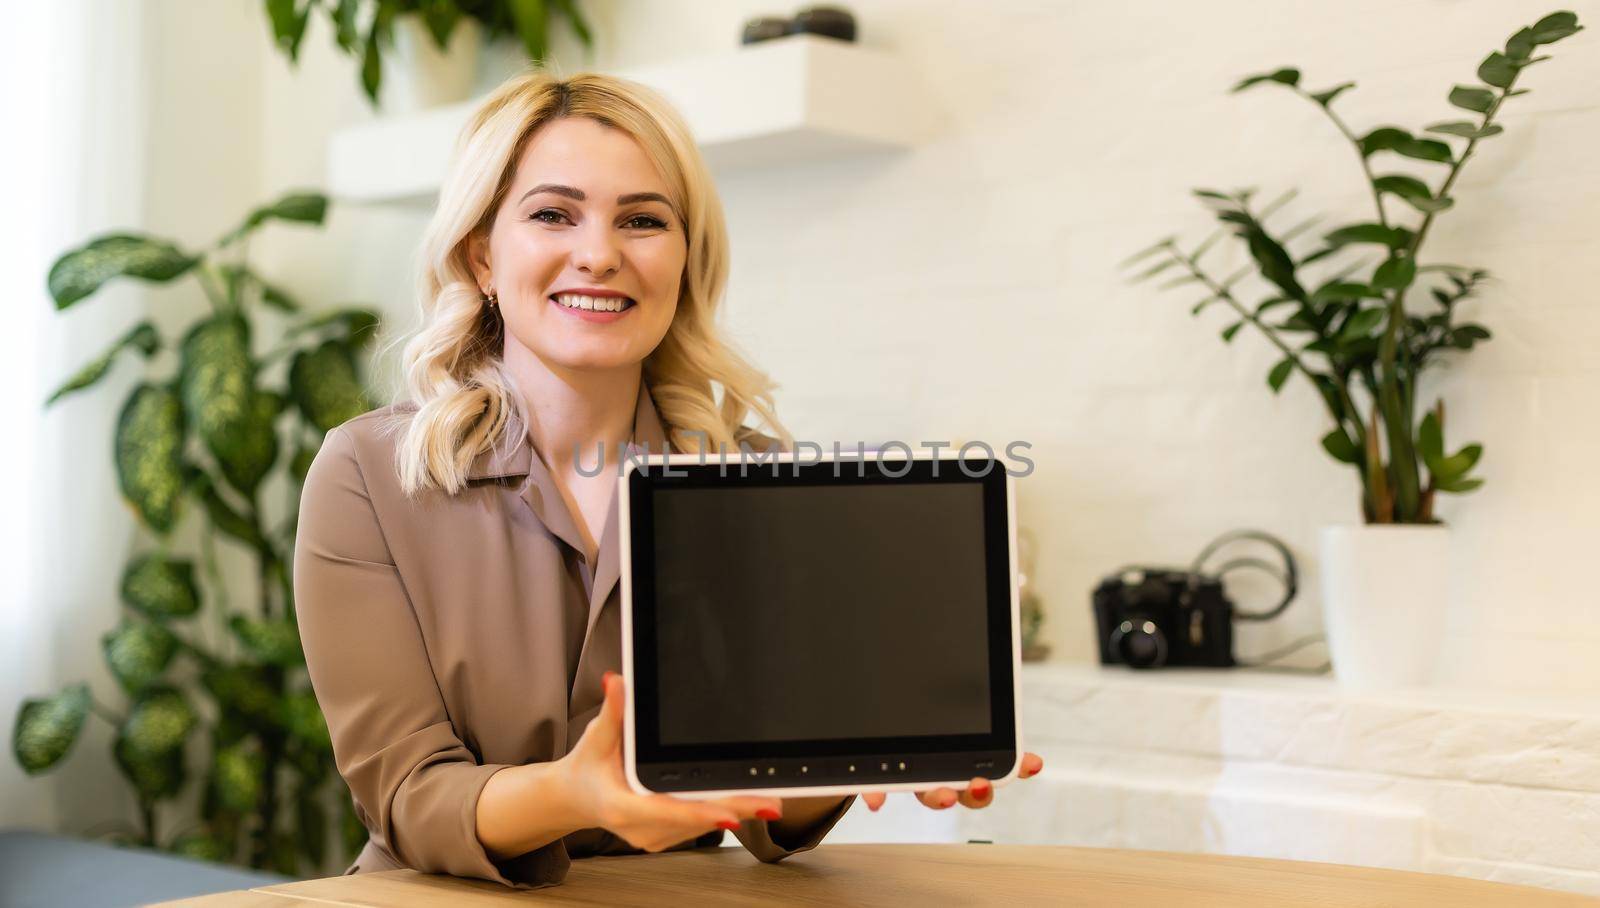 Young smiling woman showing blank tablet computer screen in office. Focus on tablet computer